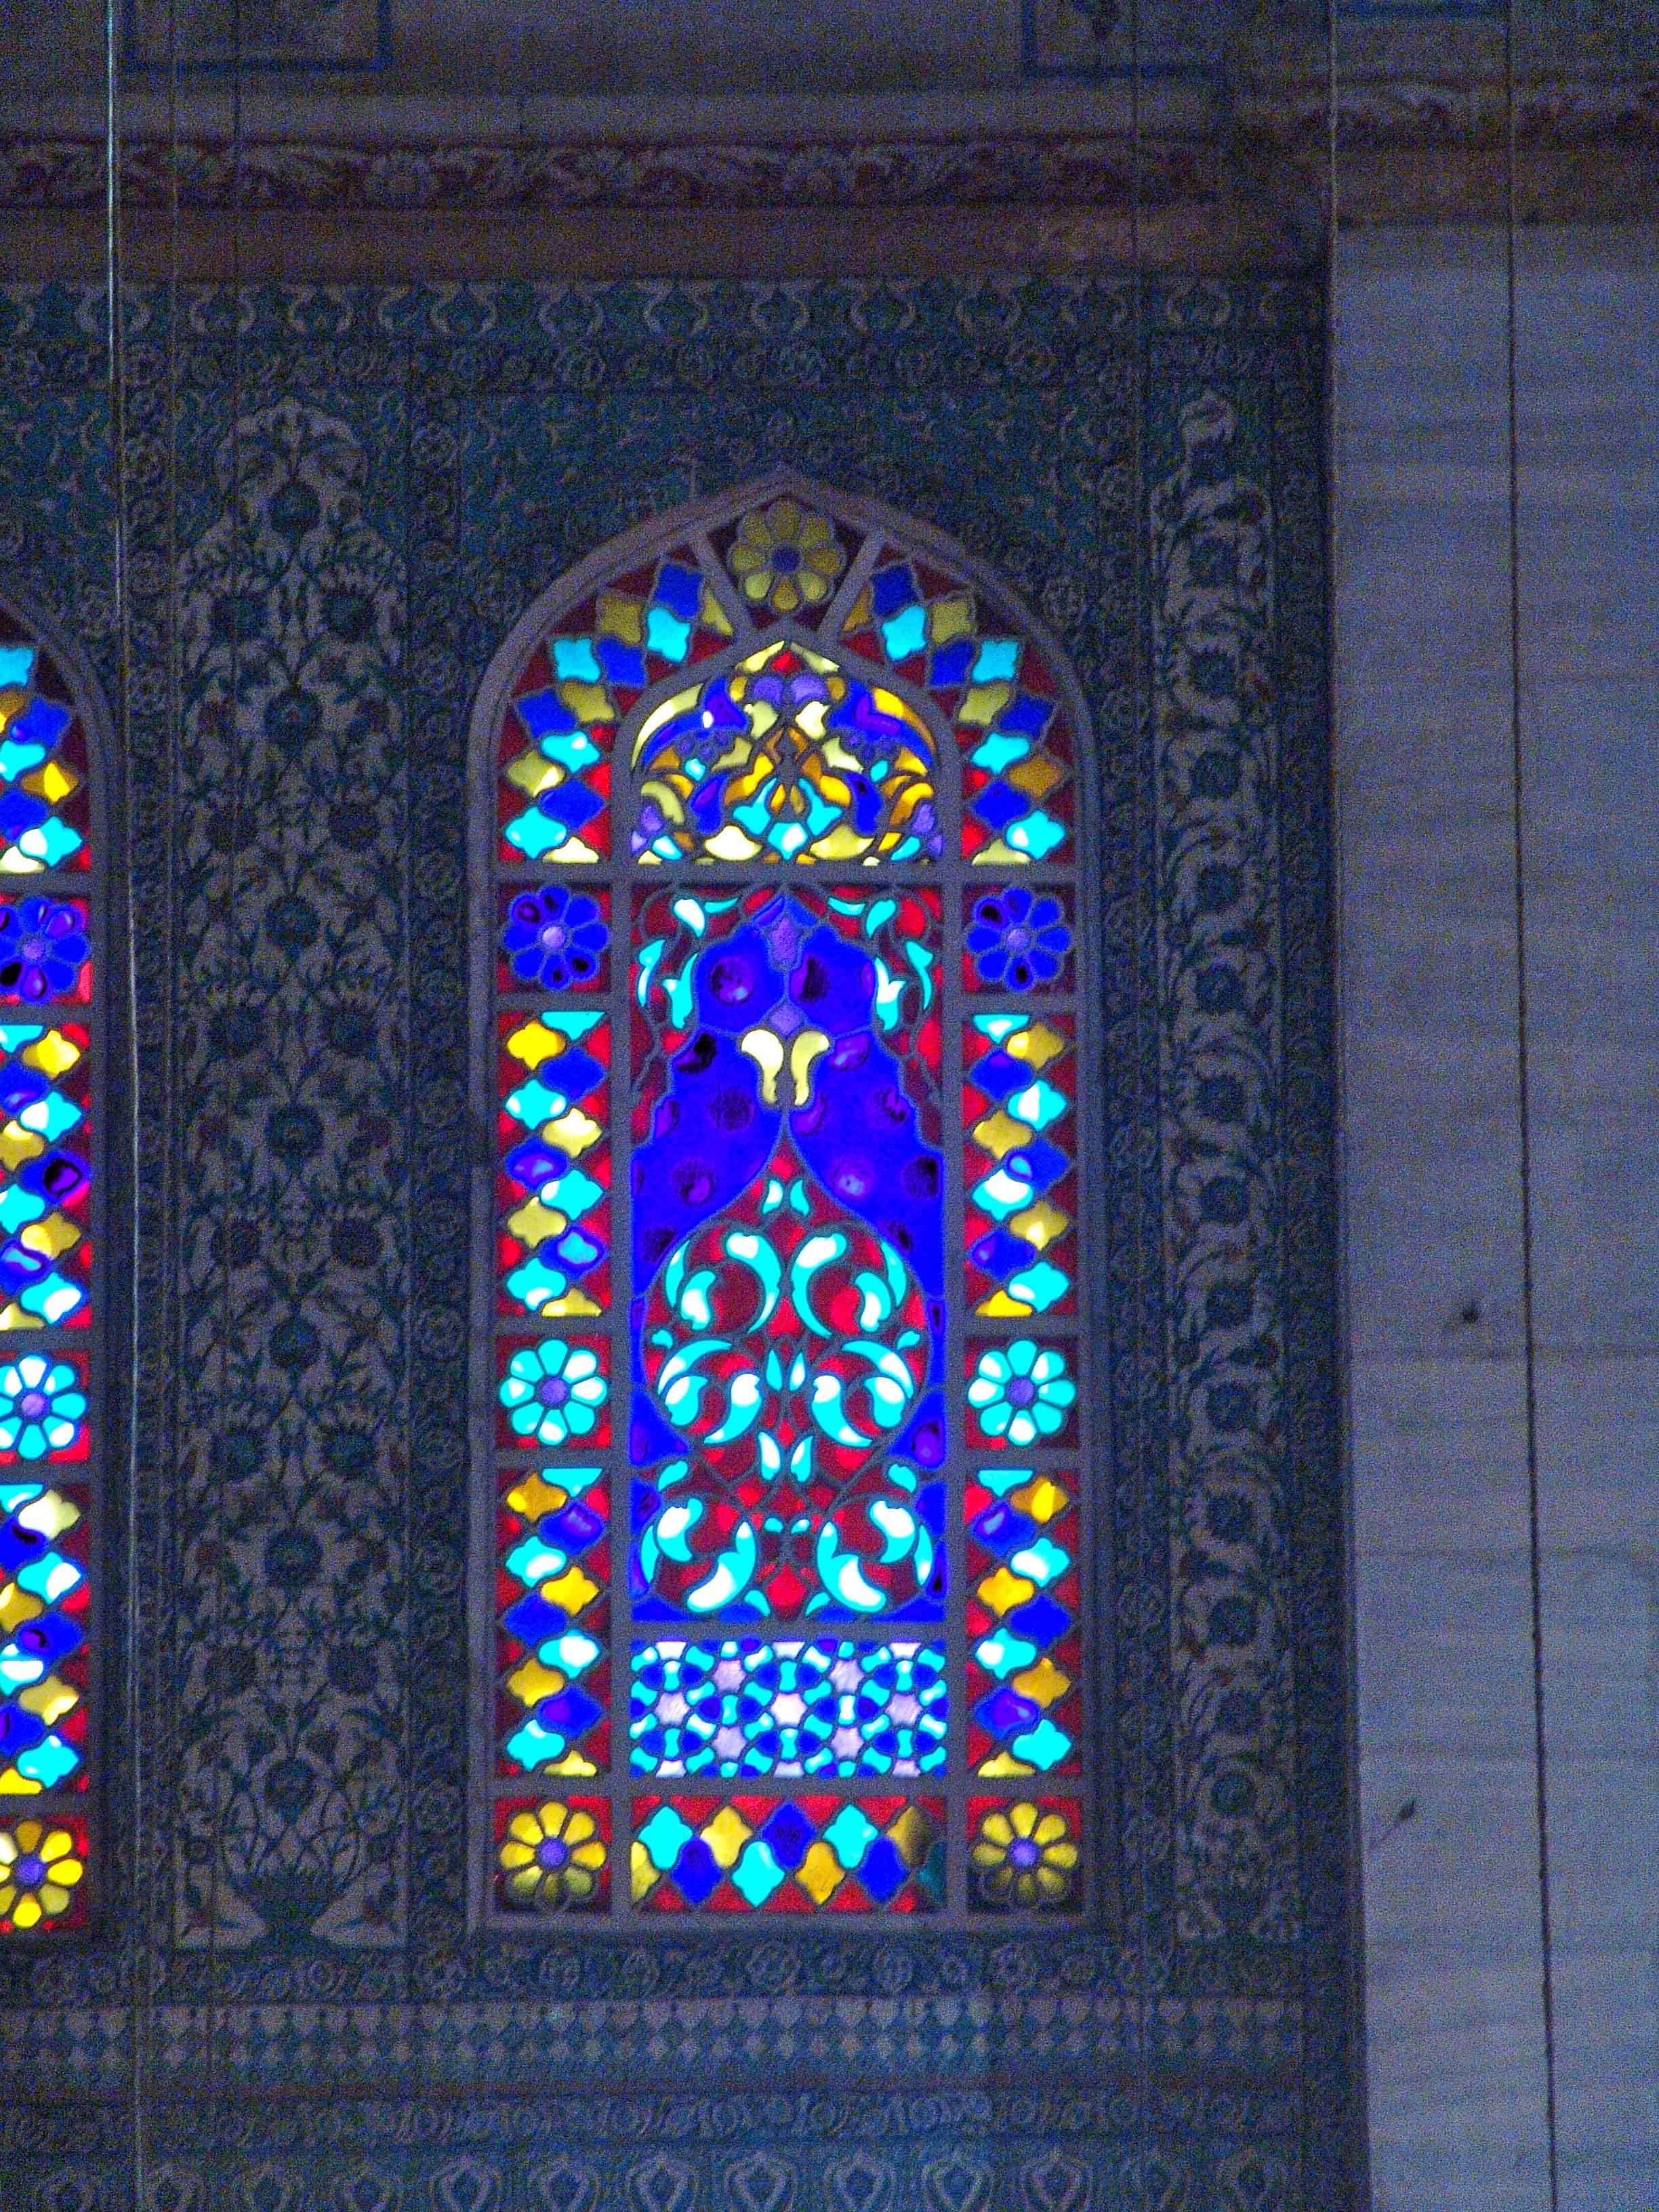 Stained glass window of the Sultan Ahmet Camii (Blue Mosque) in Fatih, Istanbul, Turkey